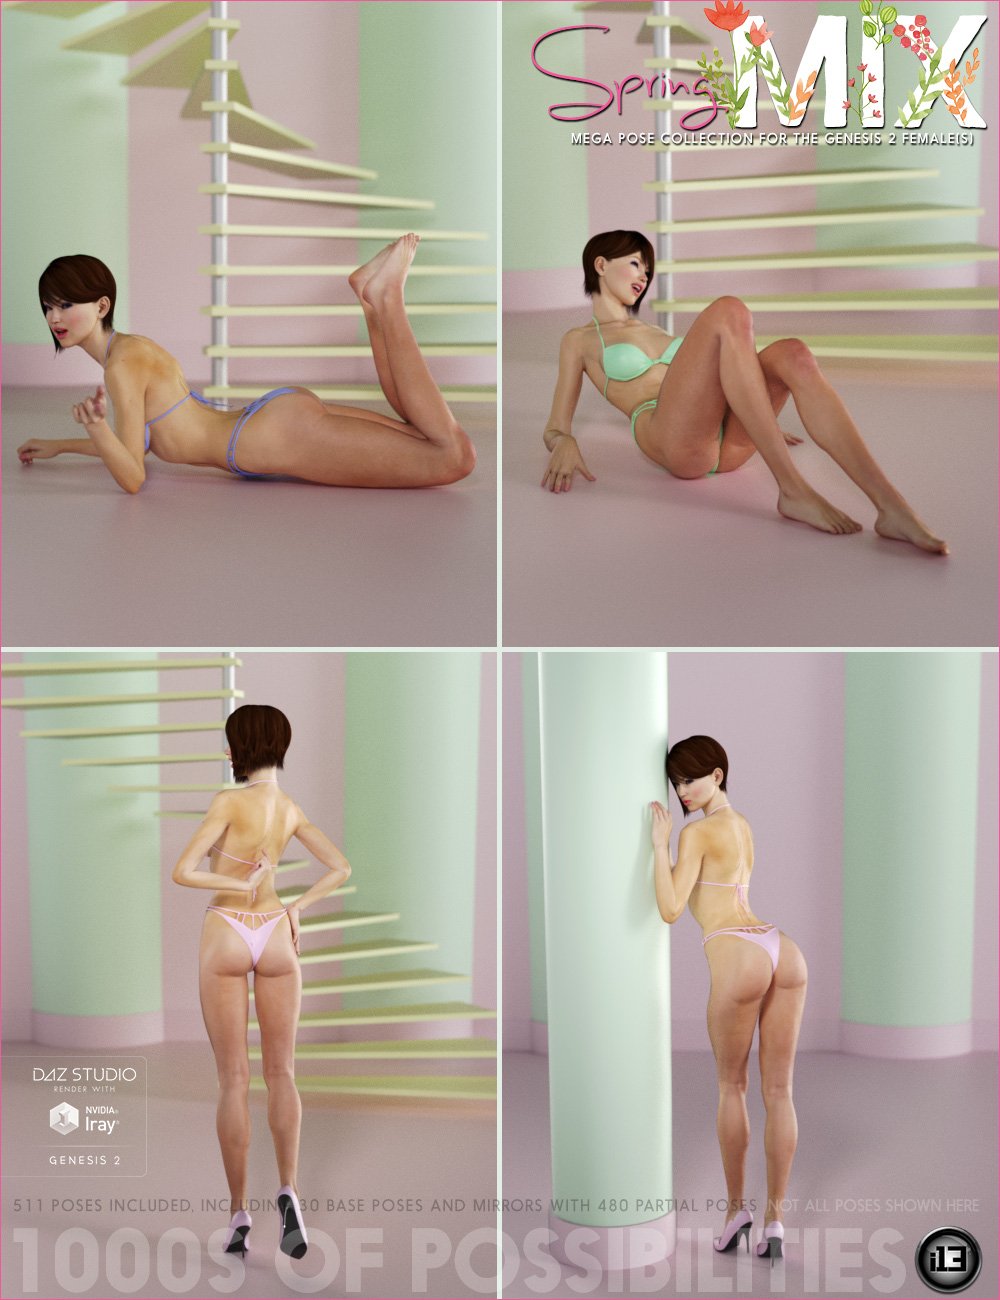 i13 SPRING MIX Pose Collection by: ironman13, 3D Models by Daz 3D